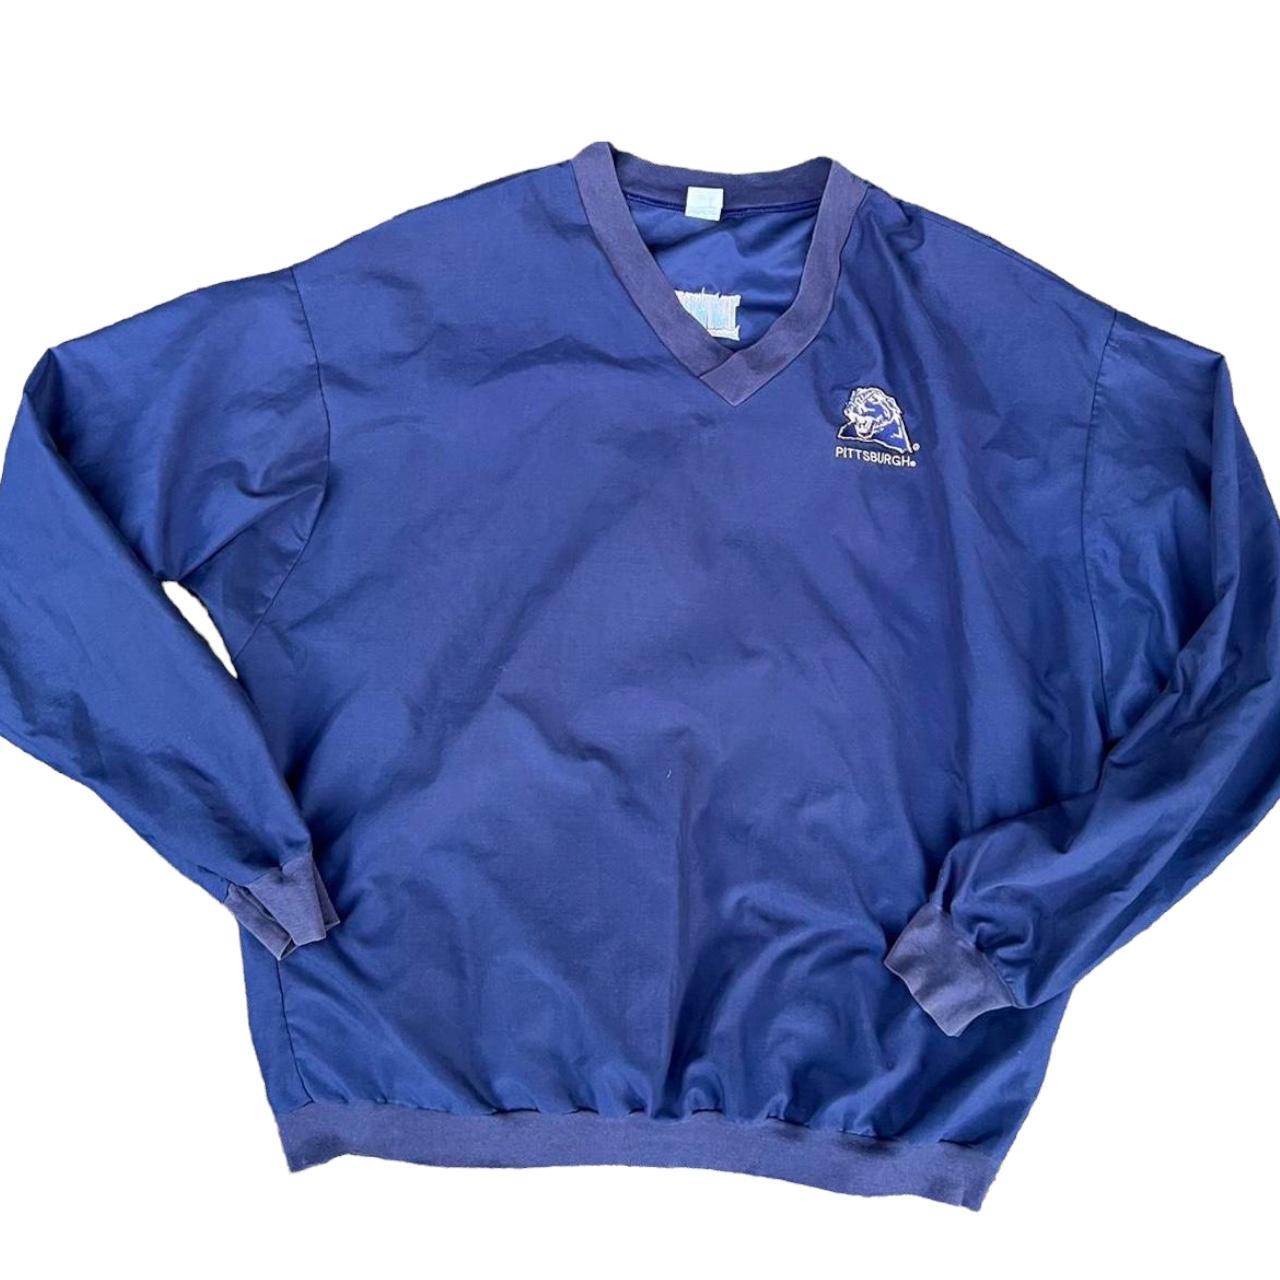 Product Image 2 - Vintage Pitt Panthers Pullover Windbreaker